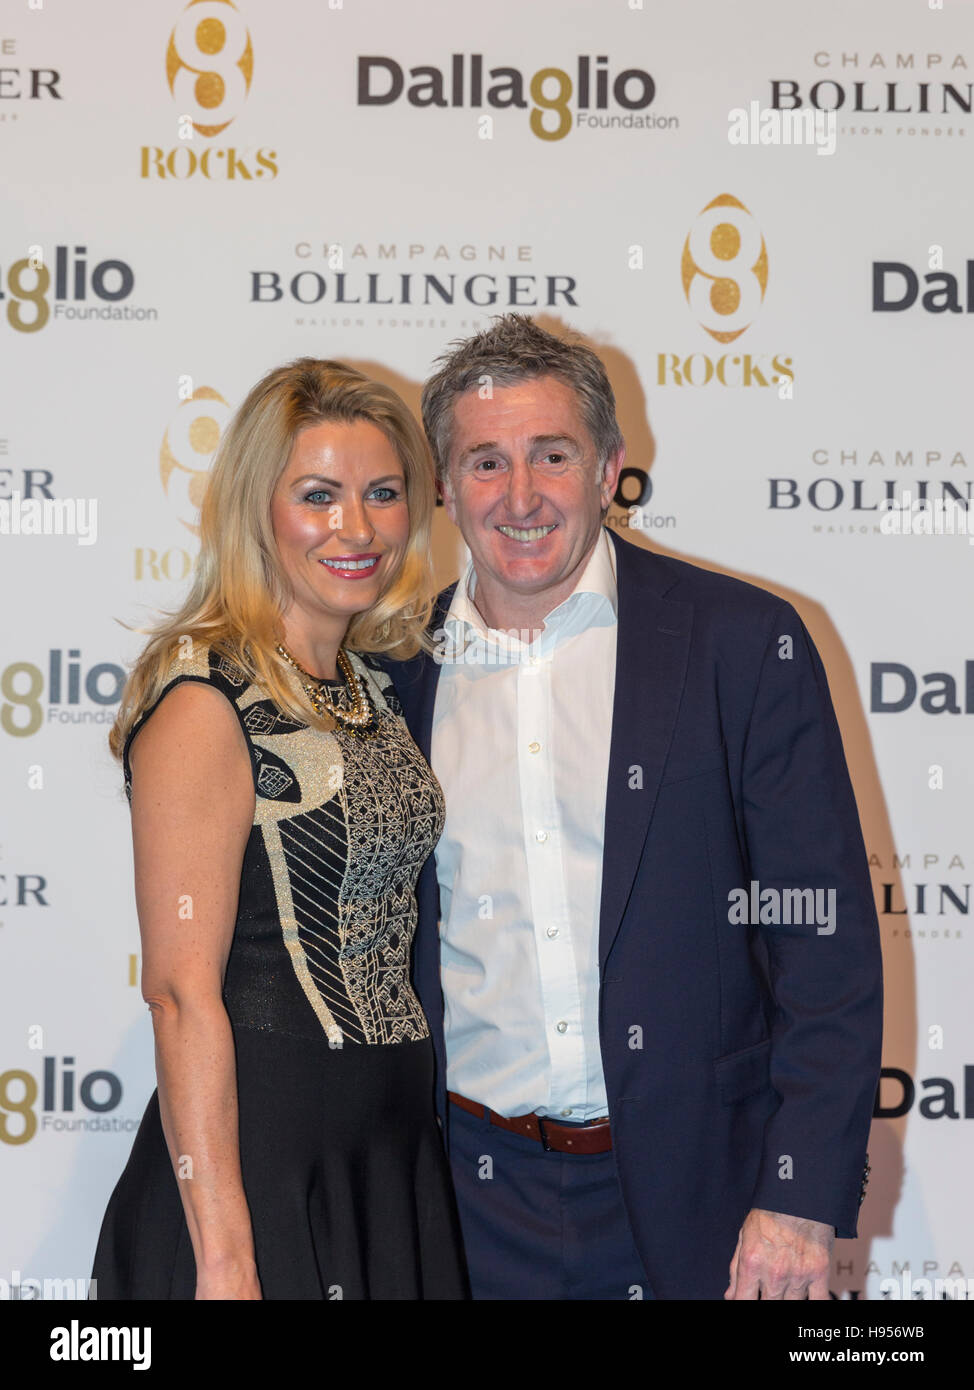 London, UK, 18th Nov 2016. Retired Welsh rugby player Jonathan Davies with wife Helen Jones Davies.  A well attended red carpet as celebrities arrive at the Dallaglio Foundatio '8Rocks' charity fundraising evening, held at Battersea Evolution. The foundation's RugbyWorks initiative aims to support disadvantages young people. Credit:  Imageplotter News and Sports/Alamy Live News Stock Photo